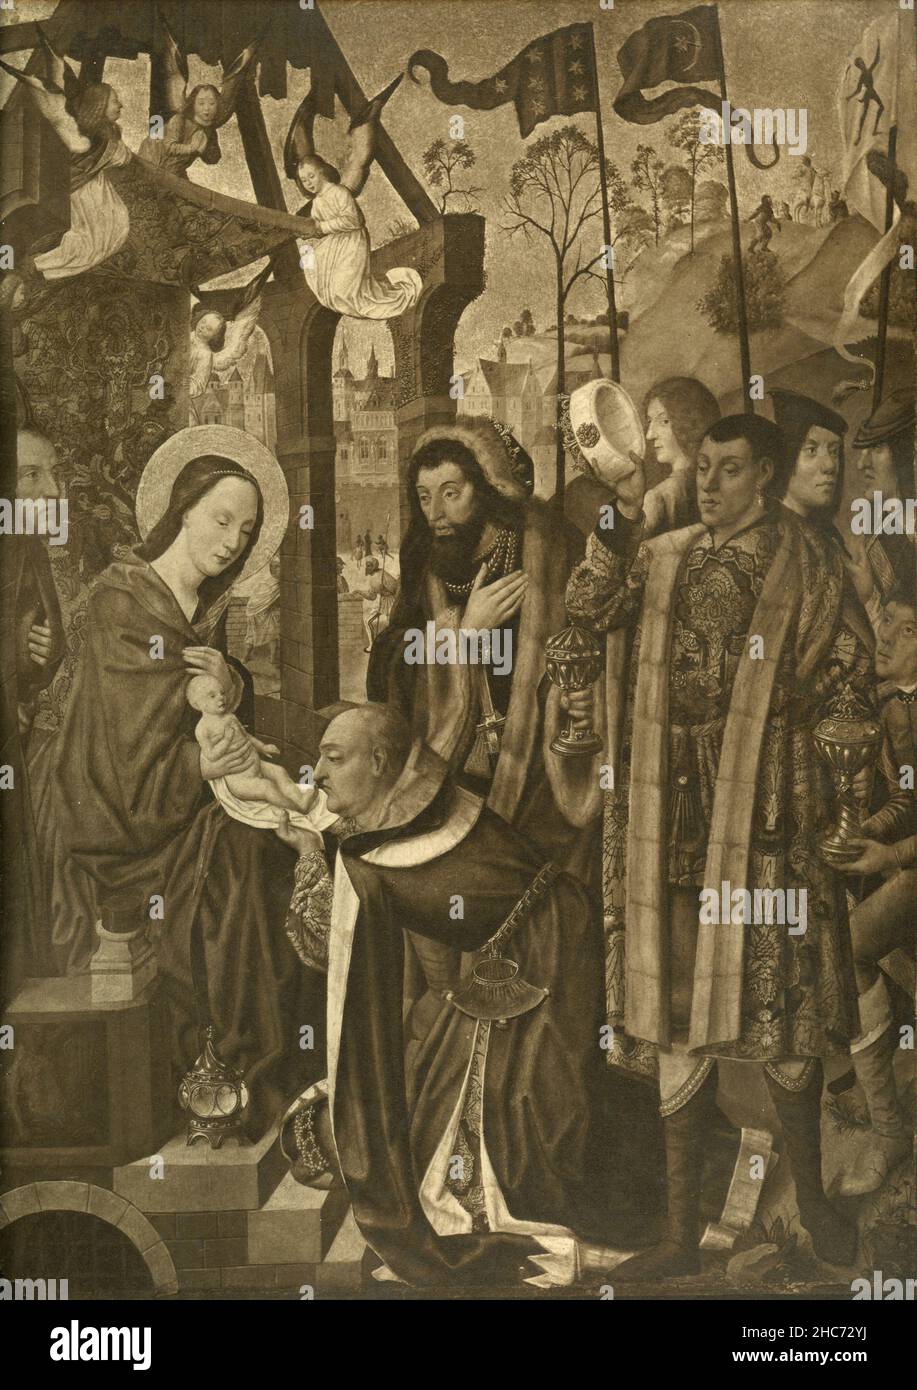 Adoration of the Kings, painting by German artist Meister der Heiligen Sippe, Munich 1897 Stock Photo